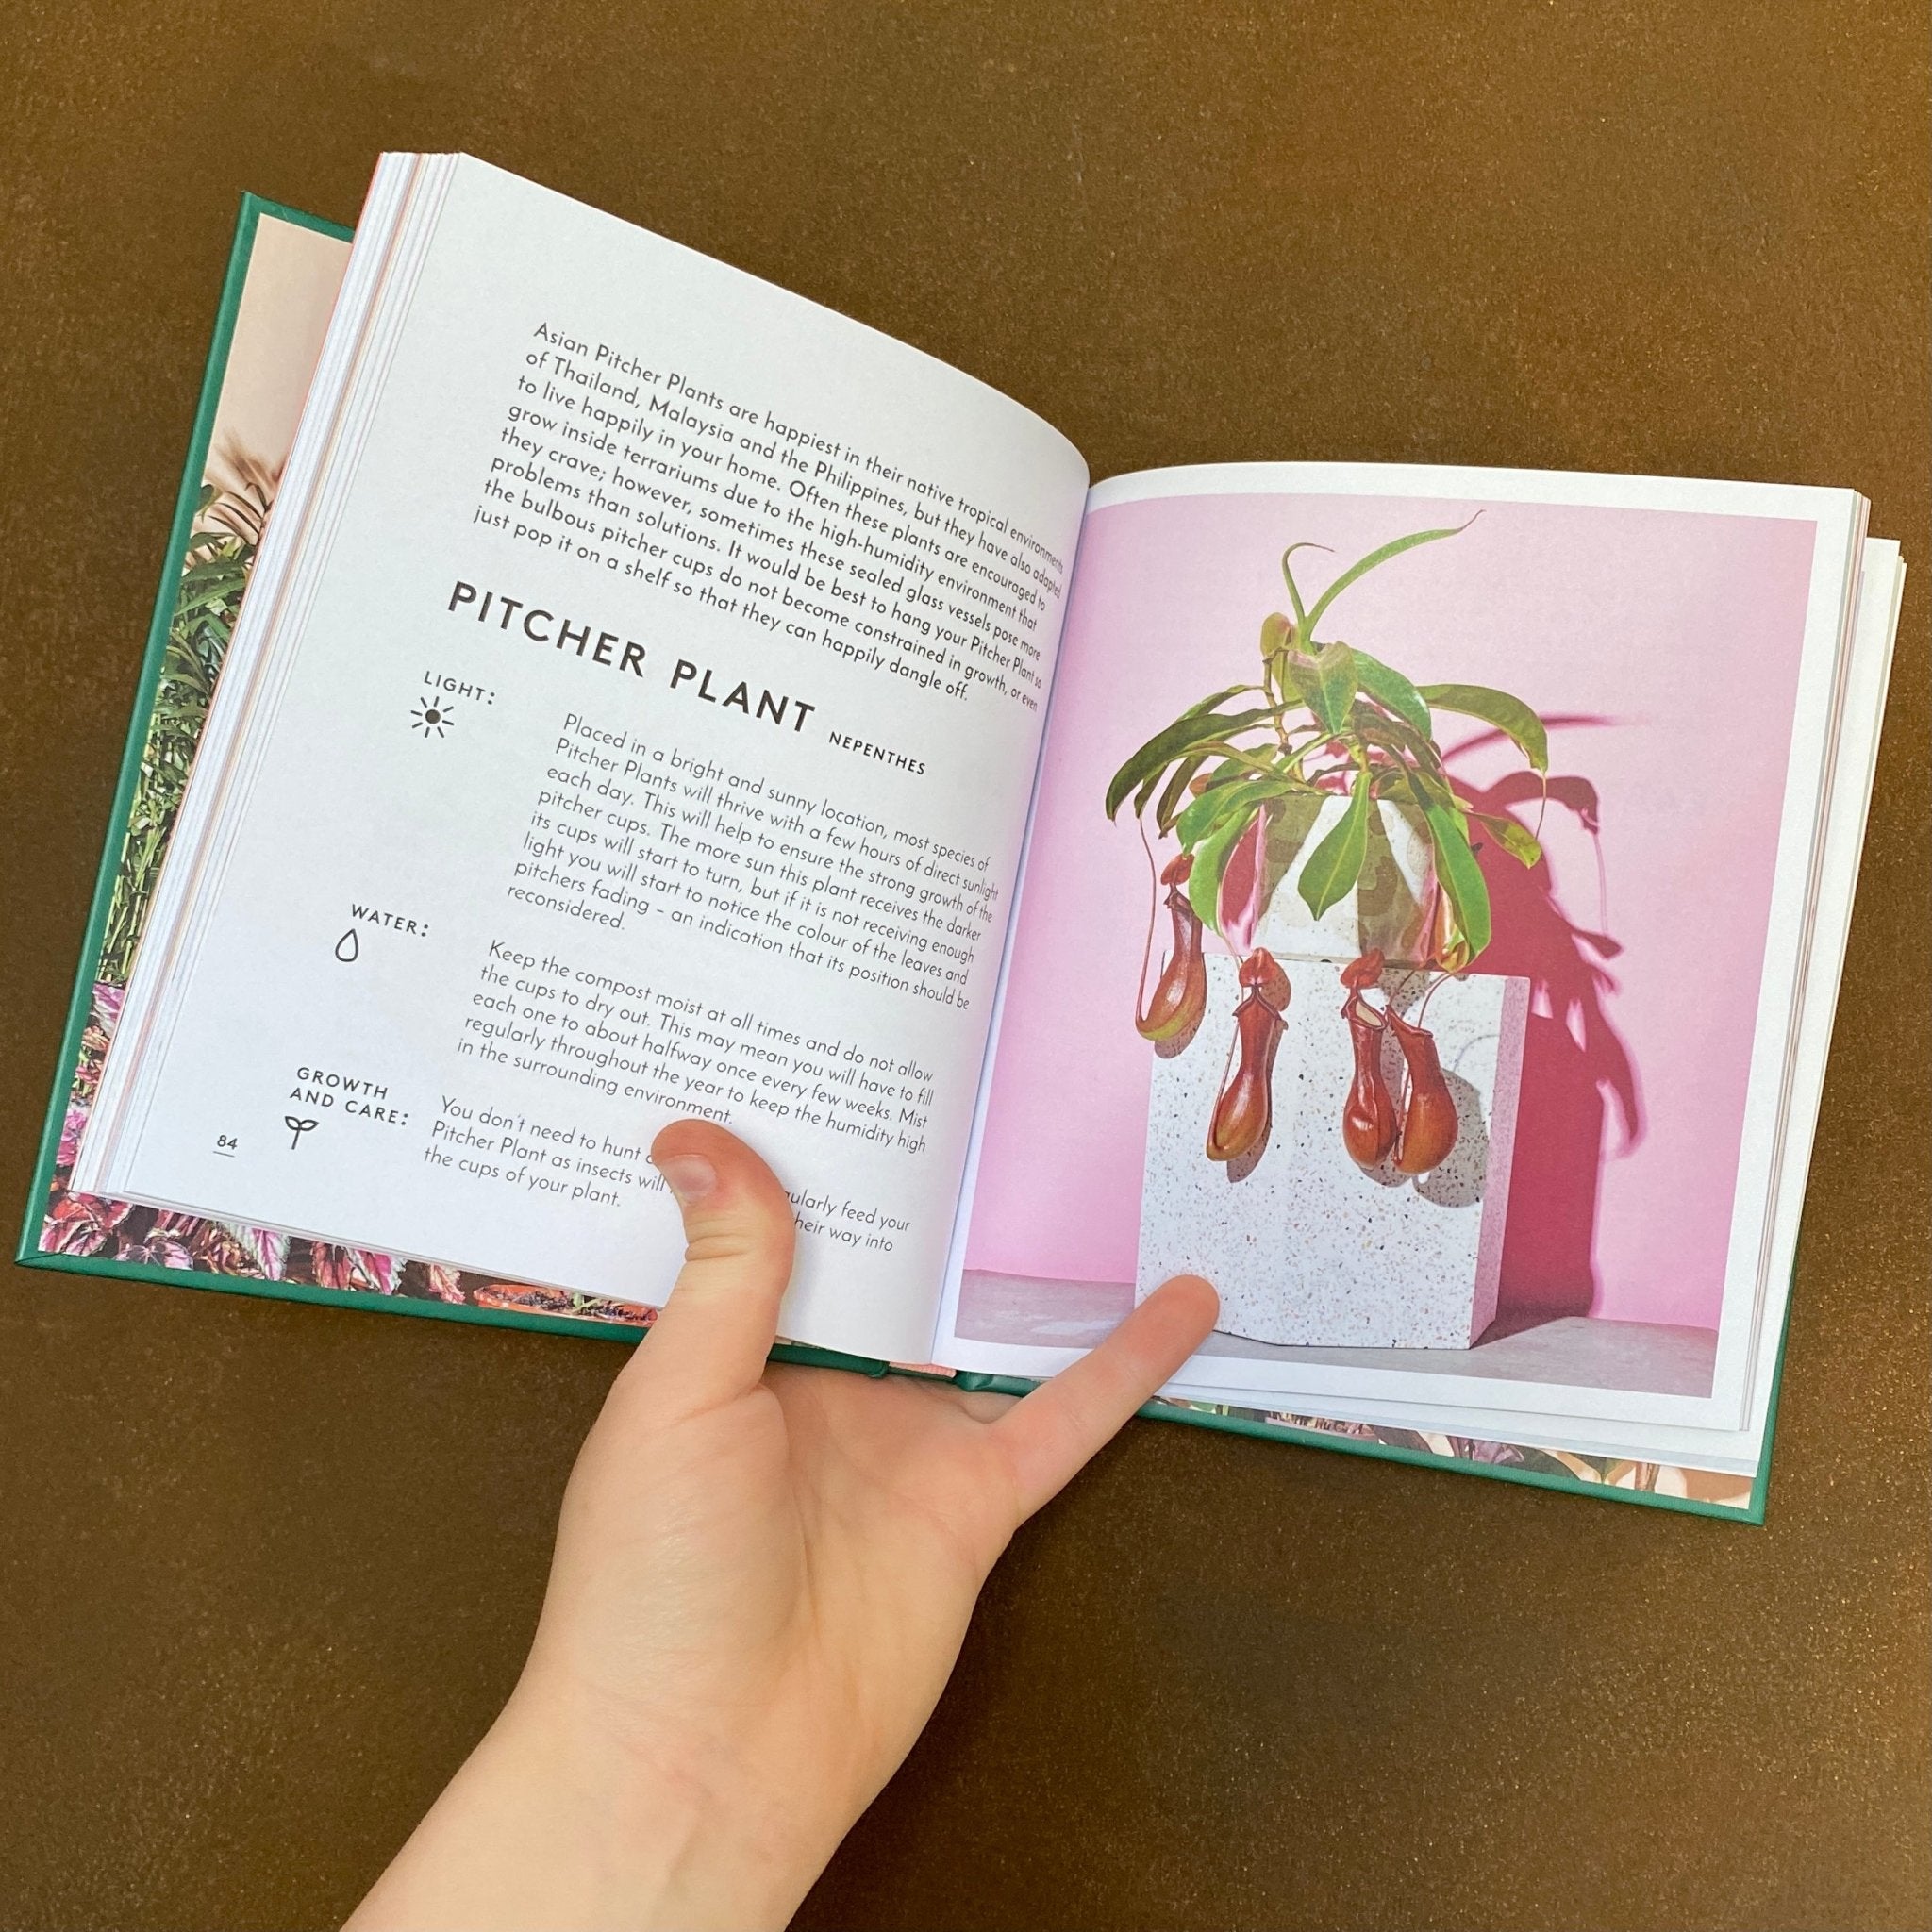 The Little Book of House Plants & Other Greenery - grow urban. UK